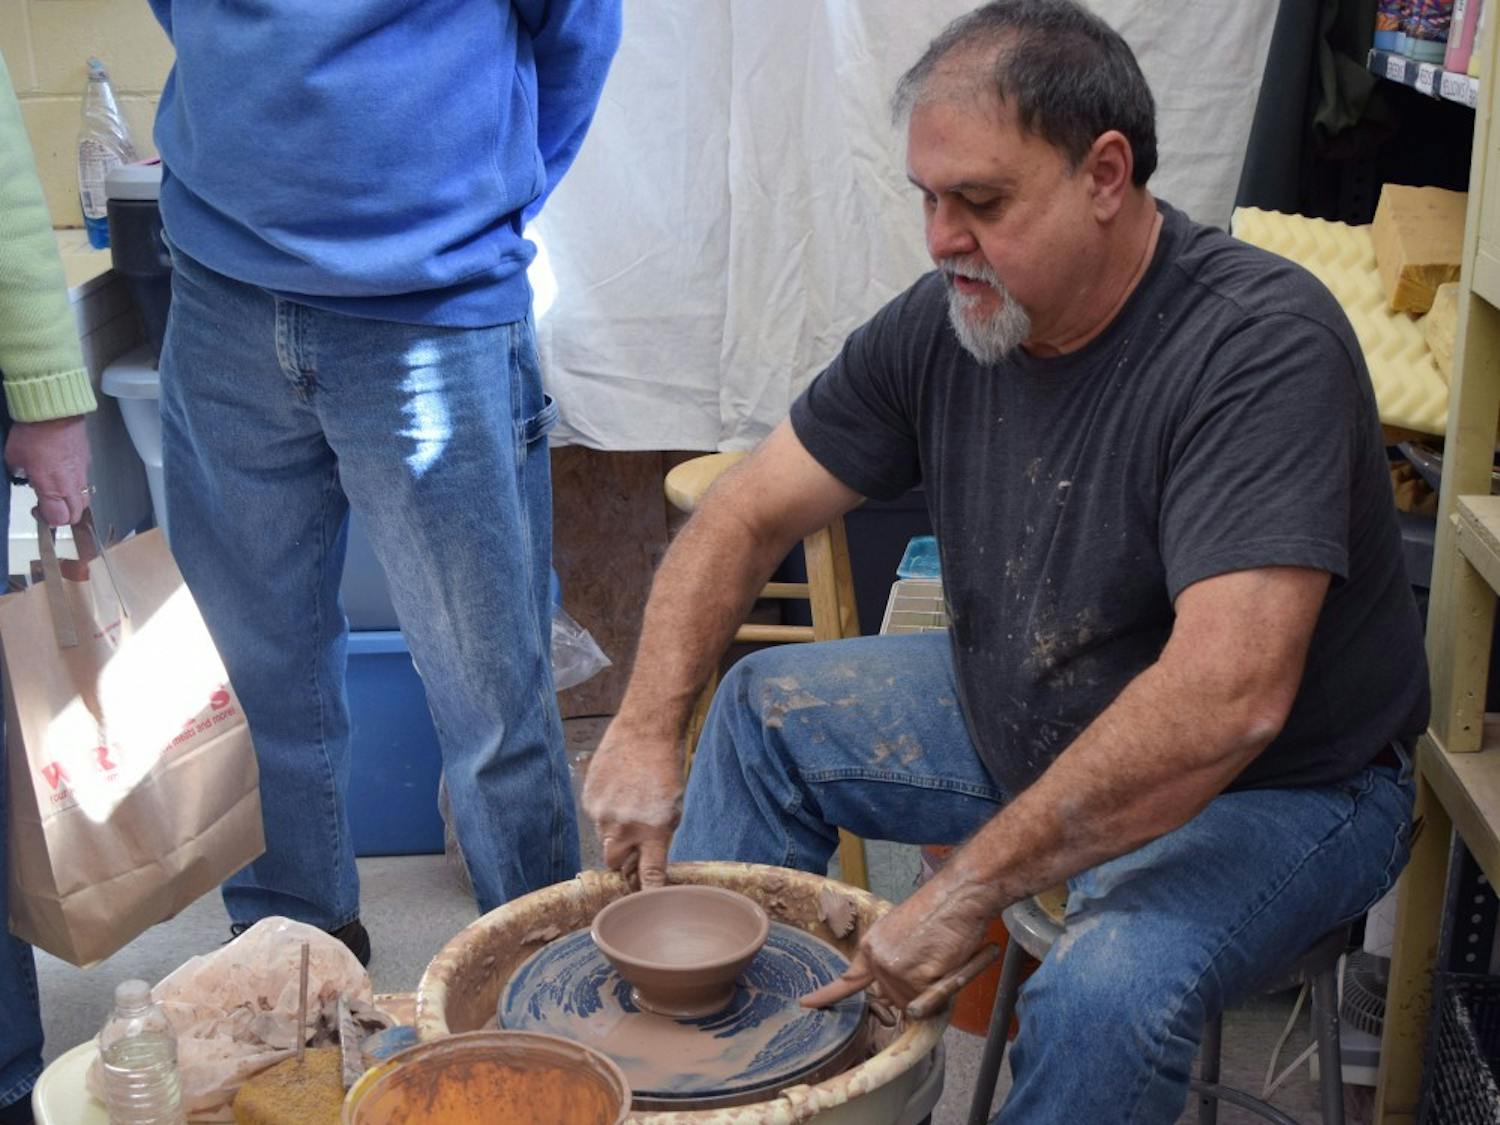 Kim Craft demonstrates how to make a bowl at&nbsp;3rd Annual Empty Bowls event on Saturday, February 13 from 10 a.m. – 2 p.m.at the Denson Drive Recreation Studio in Opelika.